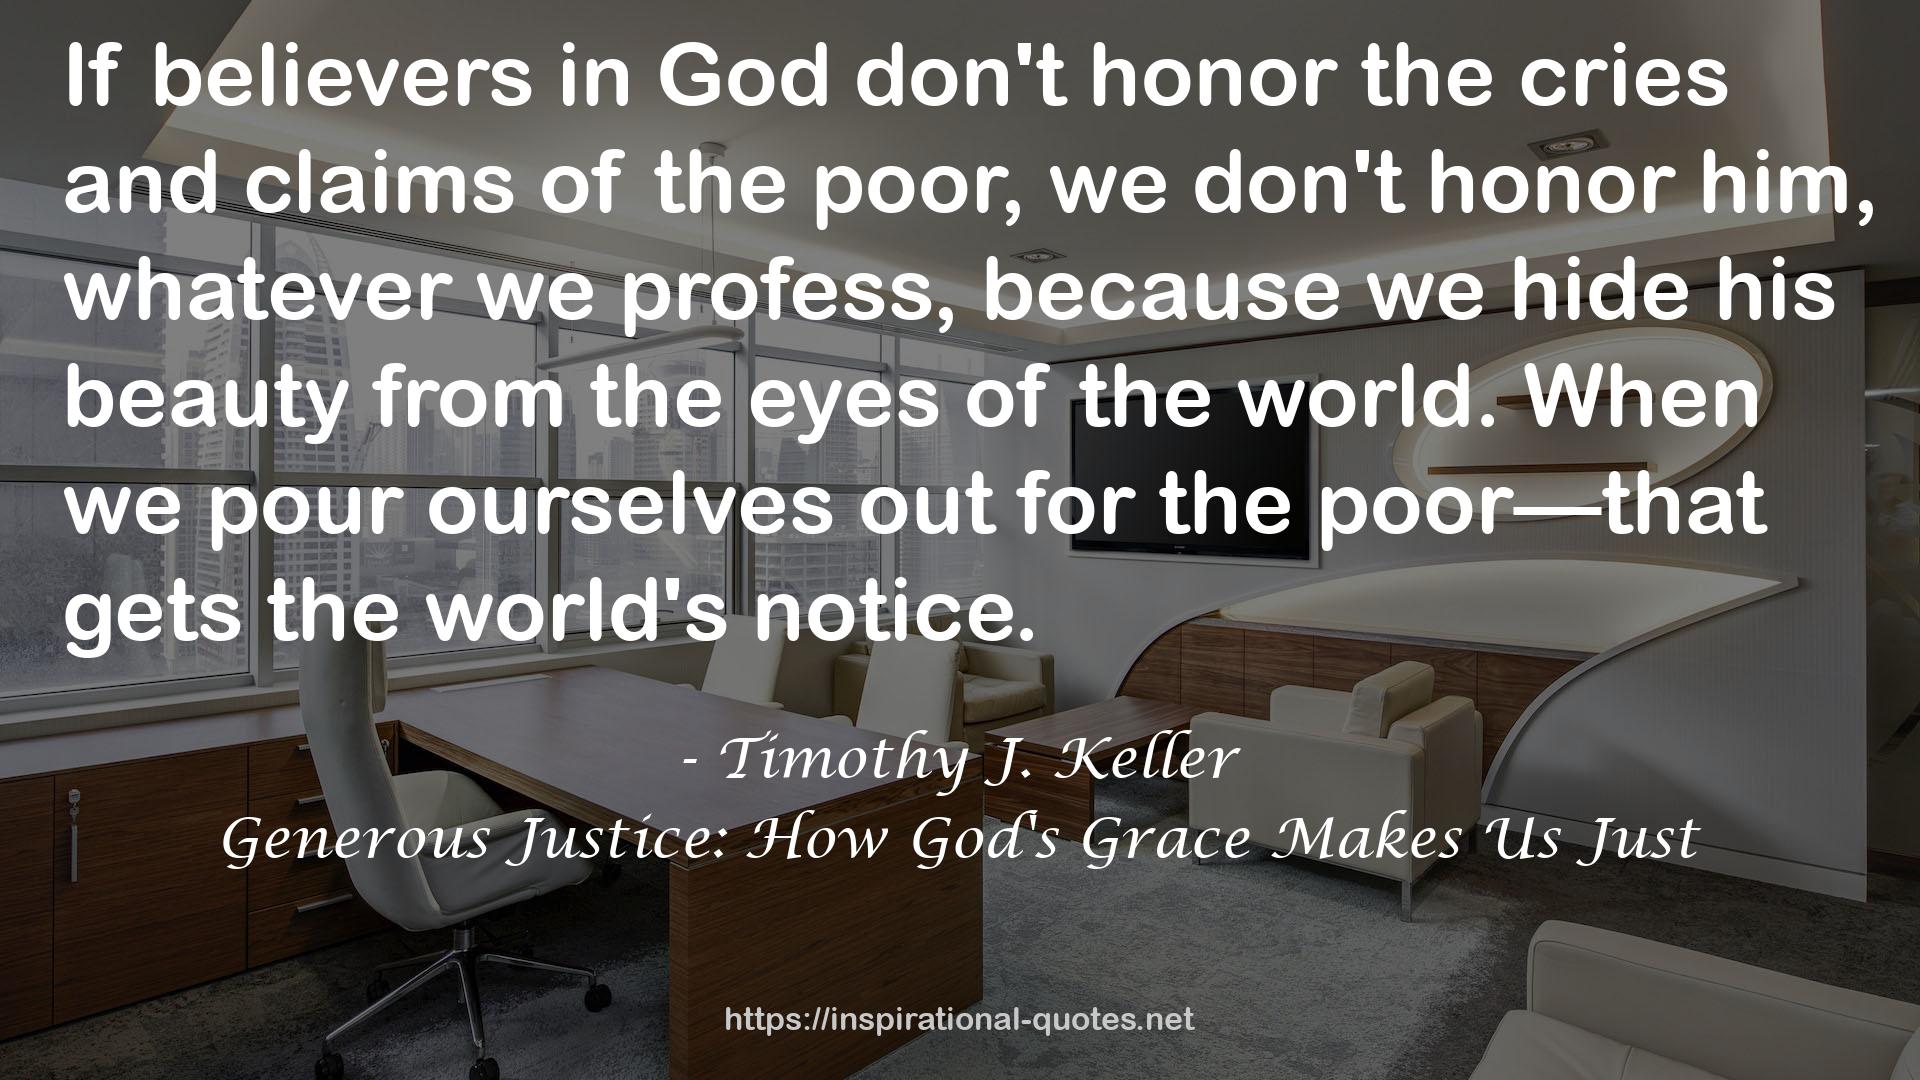 Generous Justice: How God's Grace Makes Us Just QUOTES